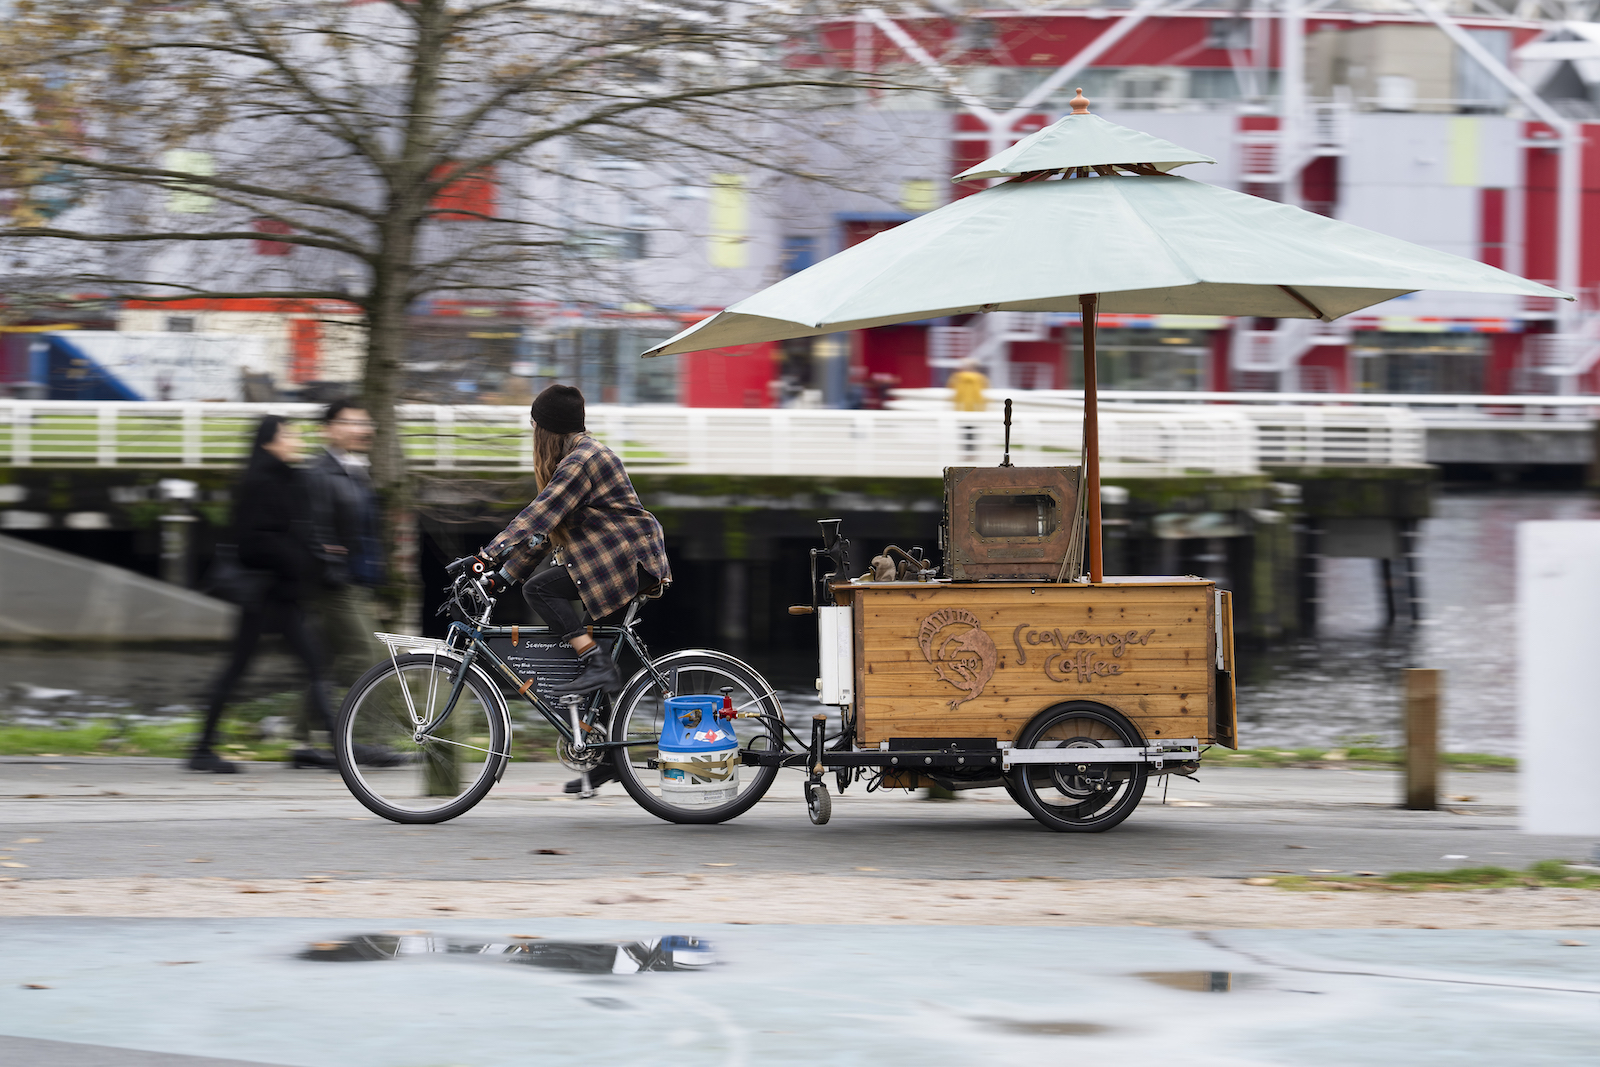 A photo of Diana biking with the Scavenger Coffee cart towing behind her.